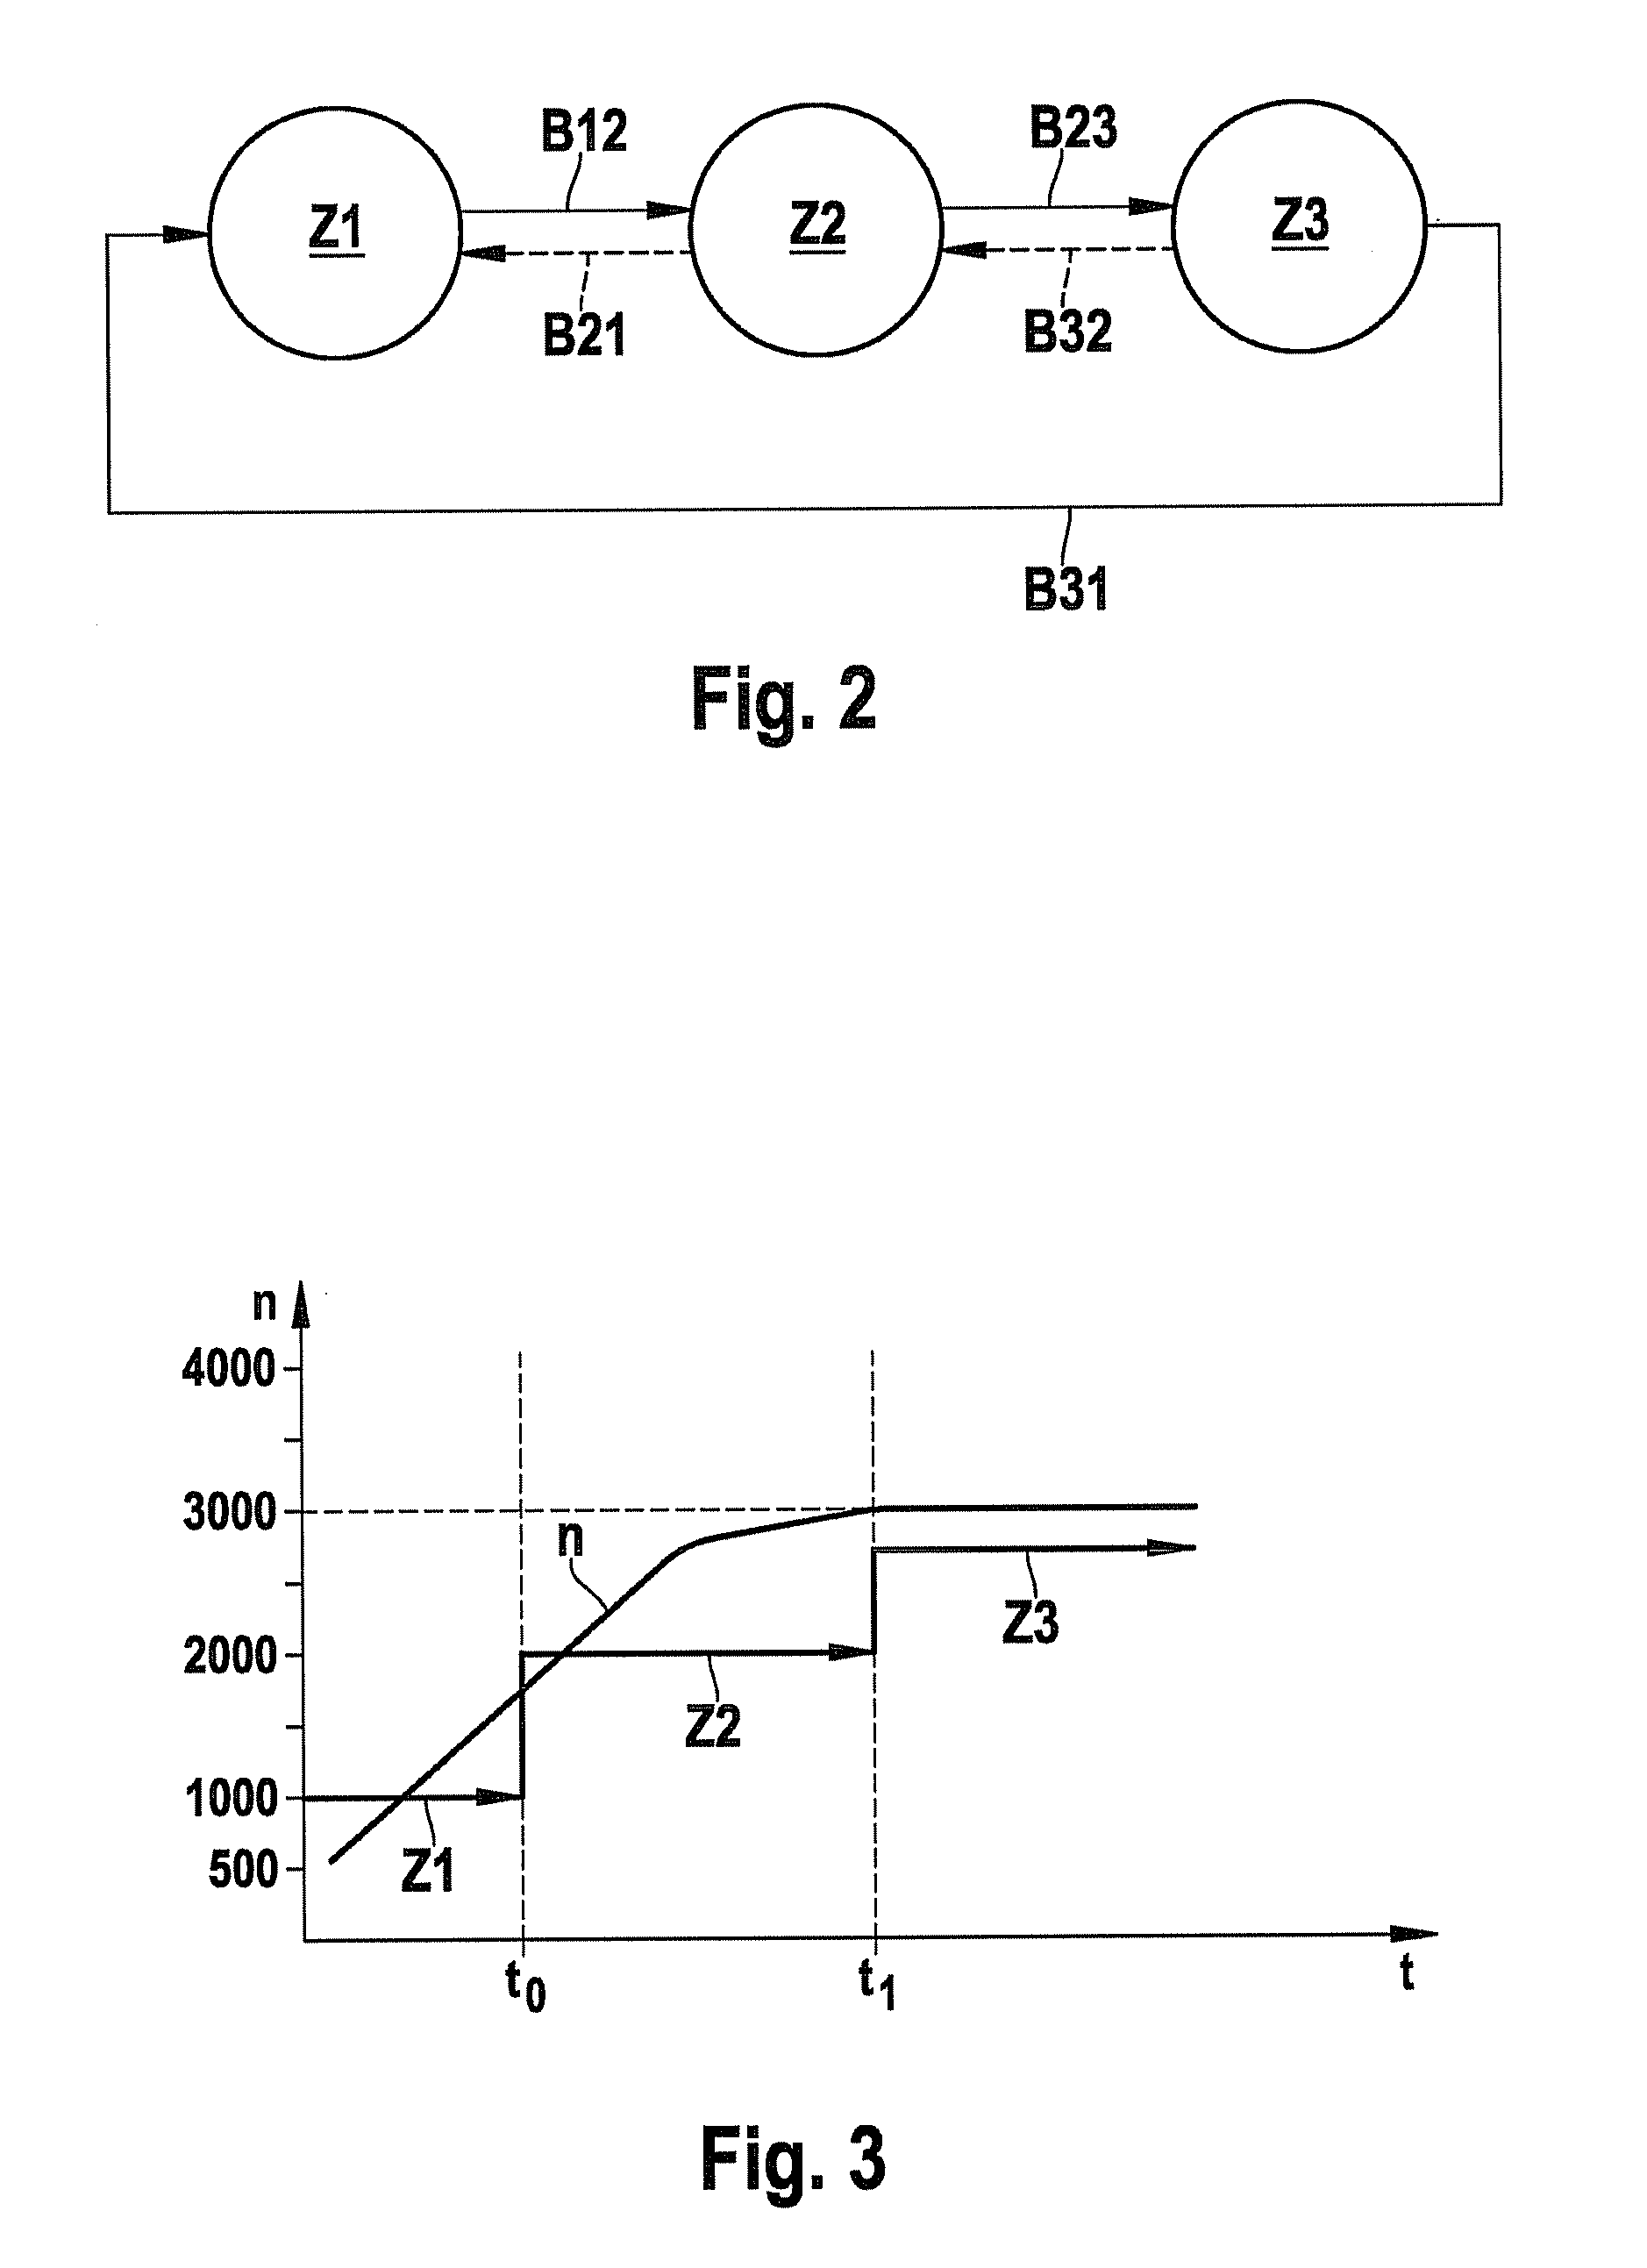 Method for shutting down an electric machine in the event of a malfunction